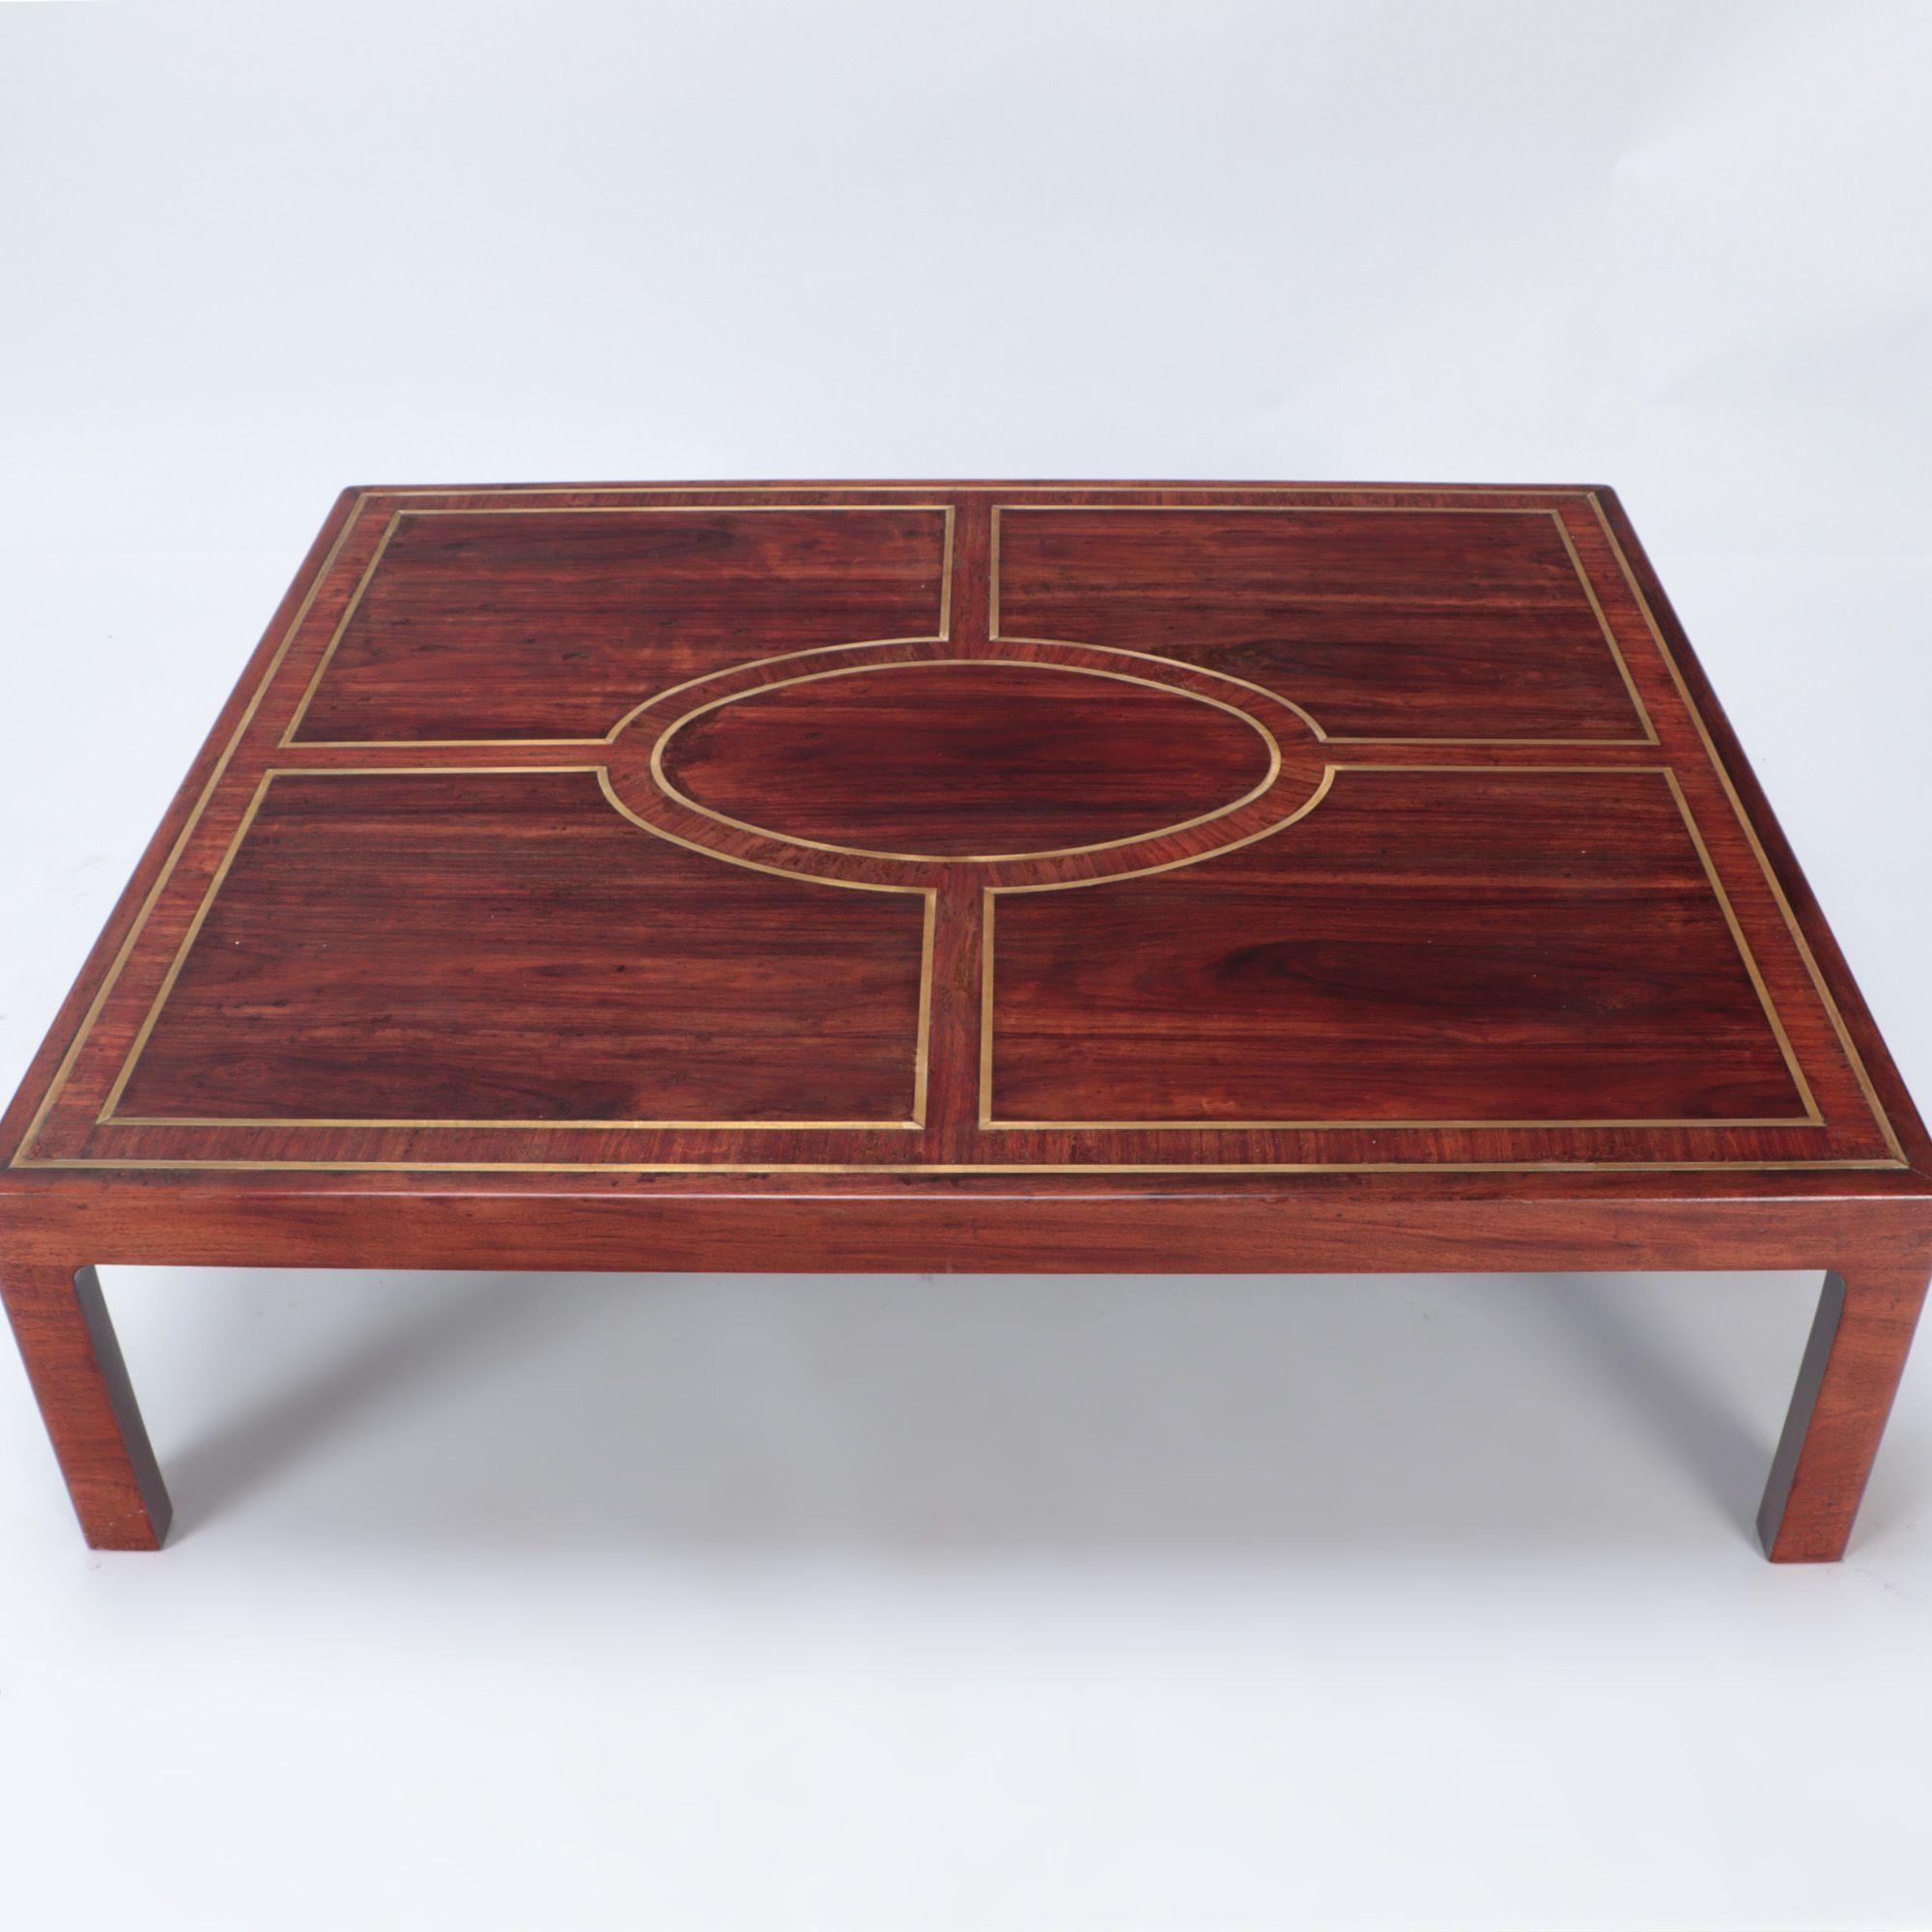 Large Rosewood and Brass Inlaid Brazilian Coffee Table, C 1975 In Good Condition For Sale In Philadelphia, PA